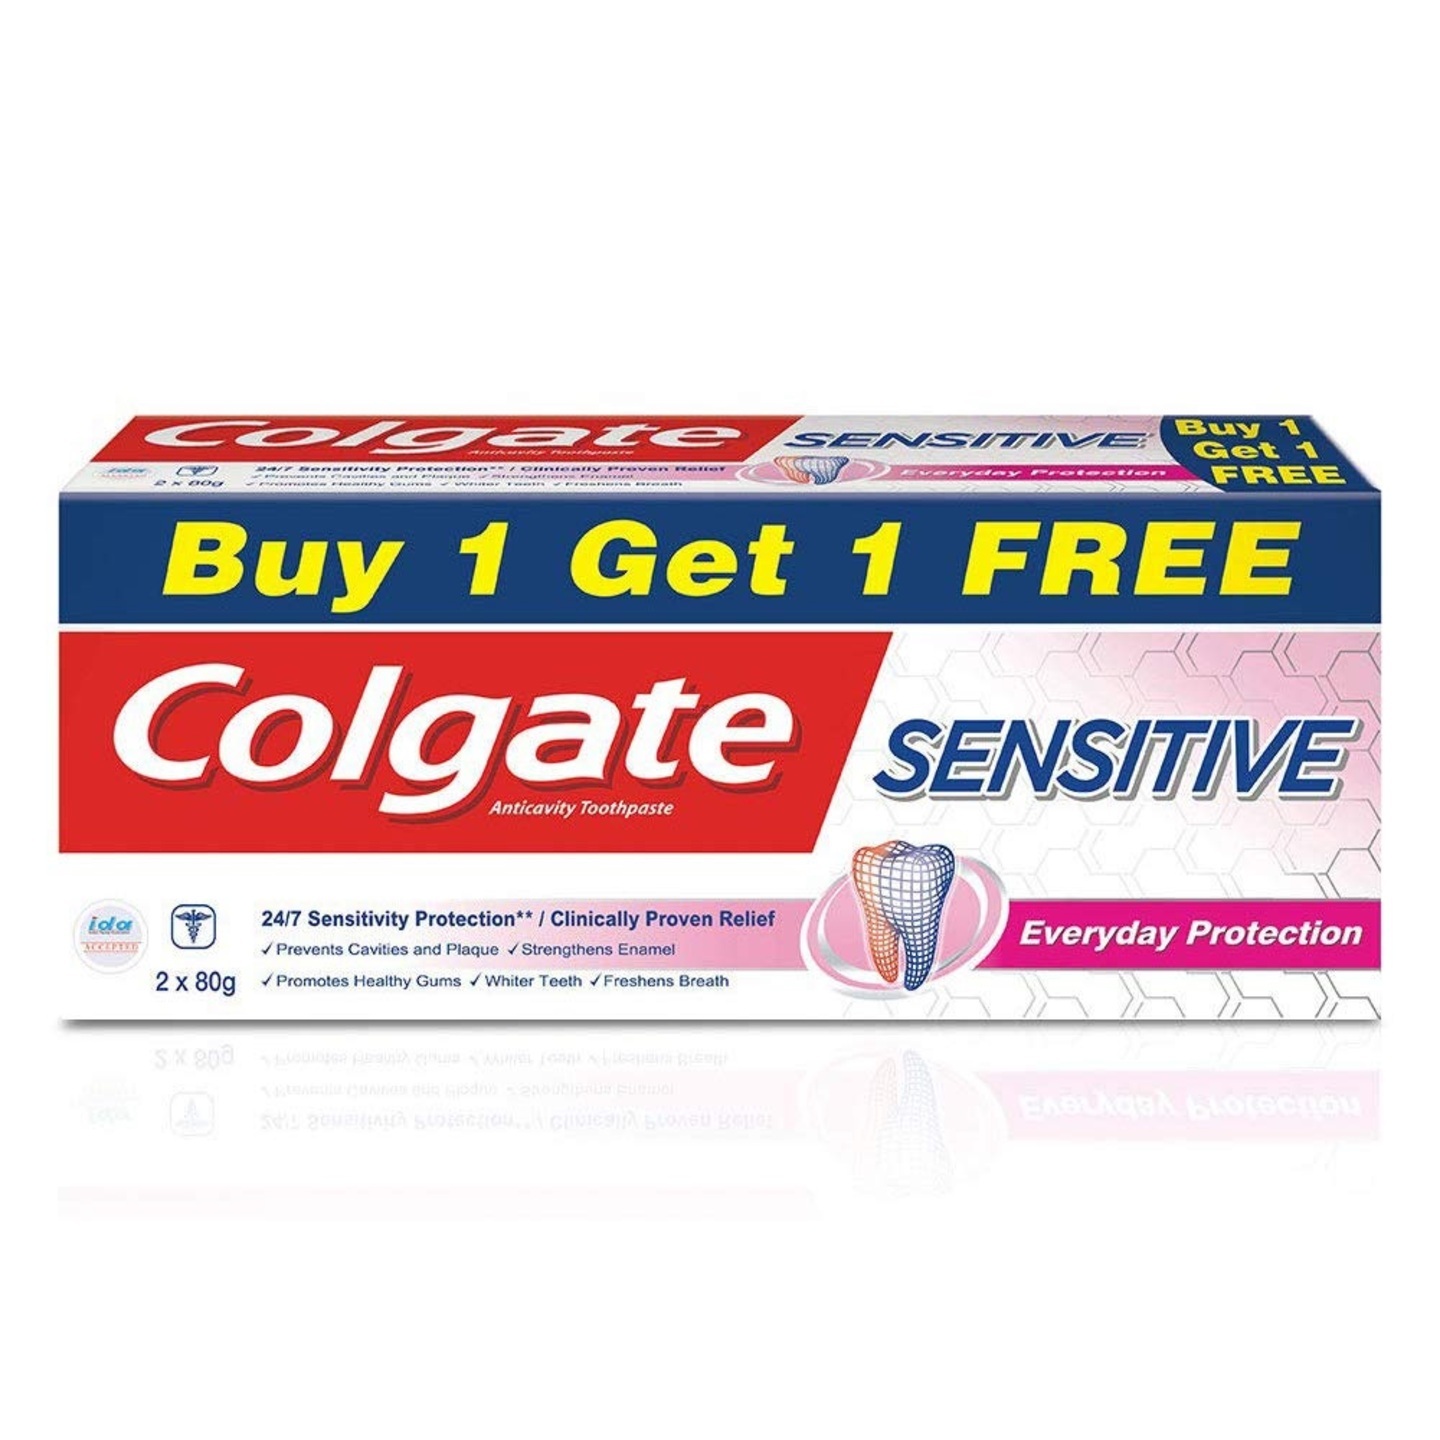 Colgate Sensitive Everyday Protection Anticavity Toothpaste - 2x80g (Buy 1 get 1 free)